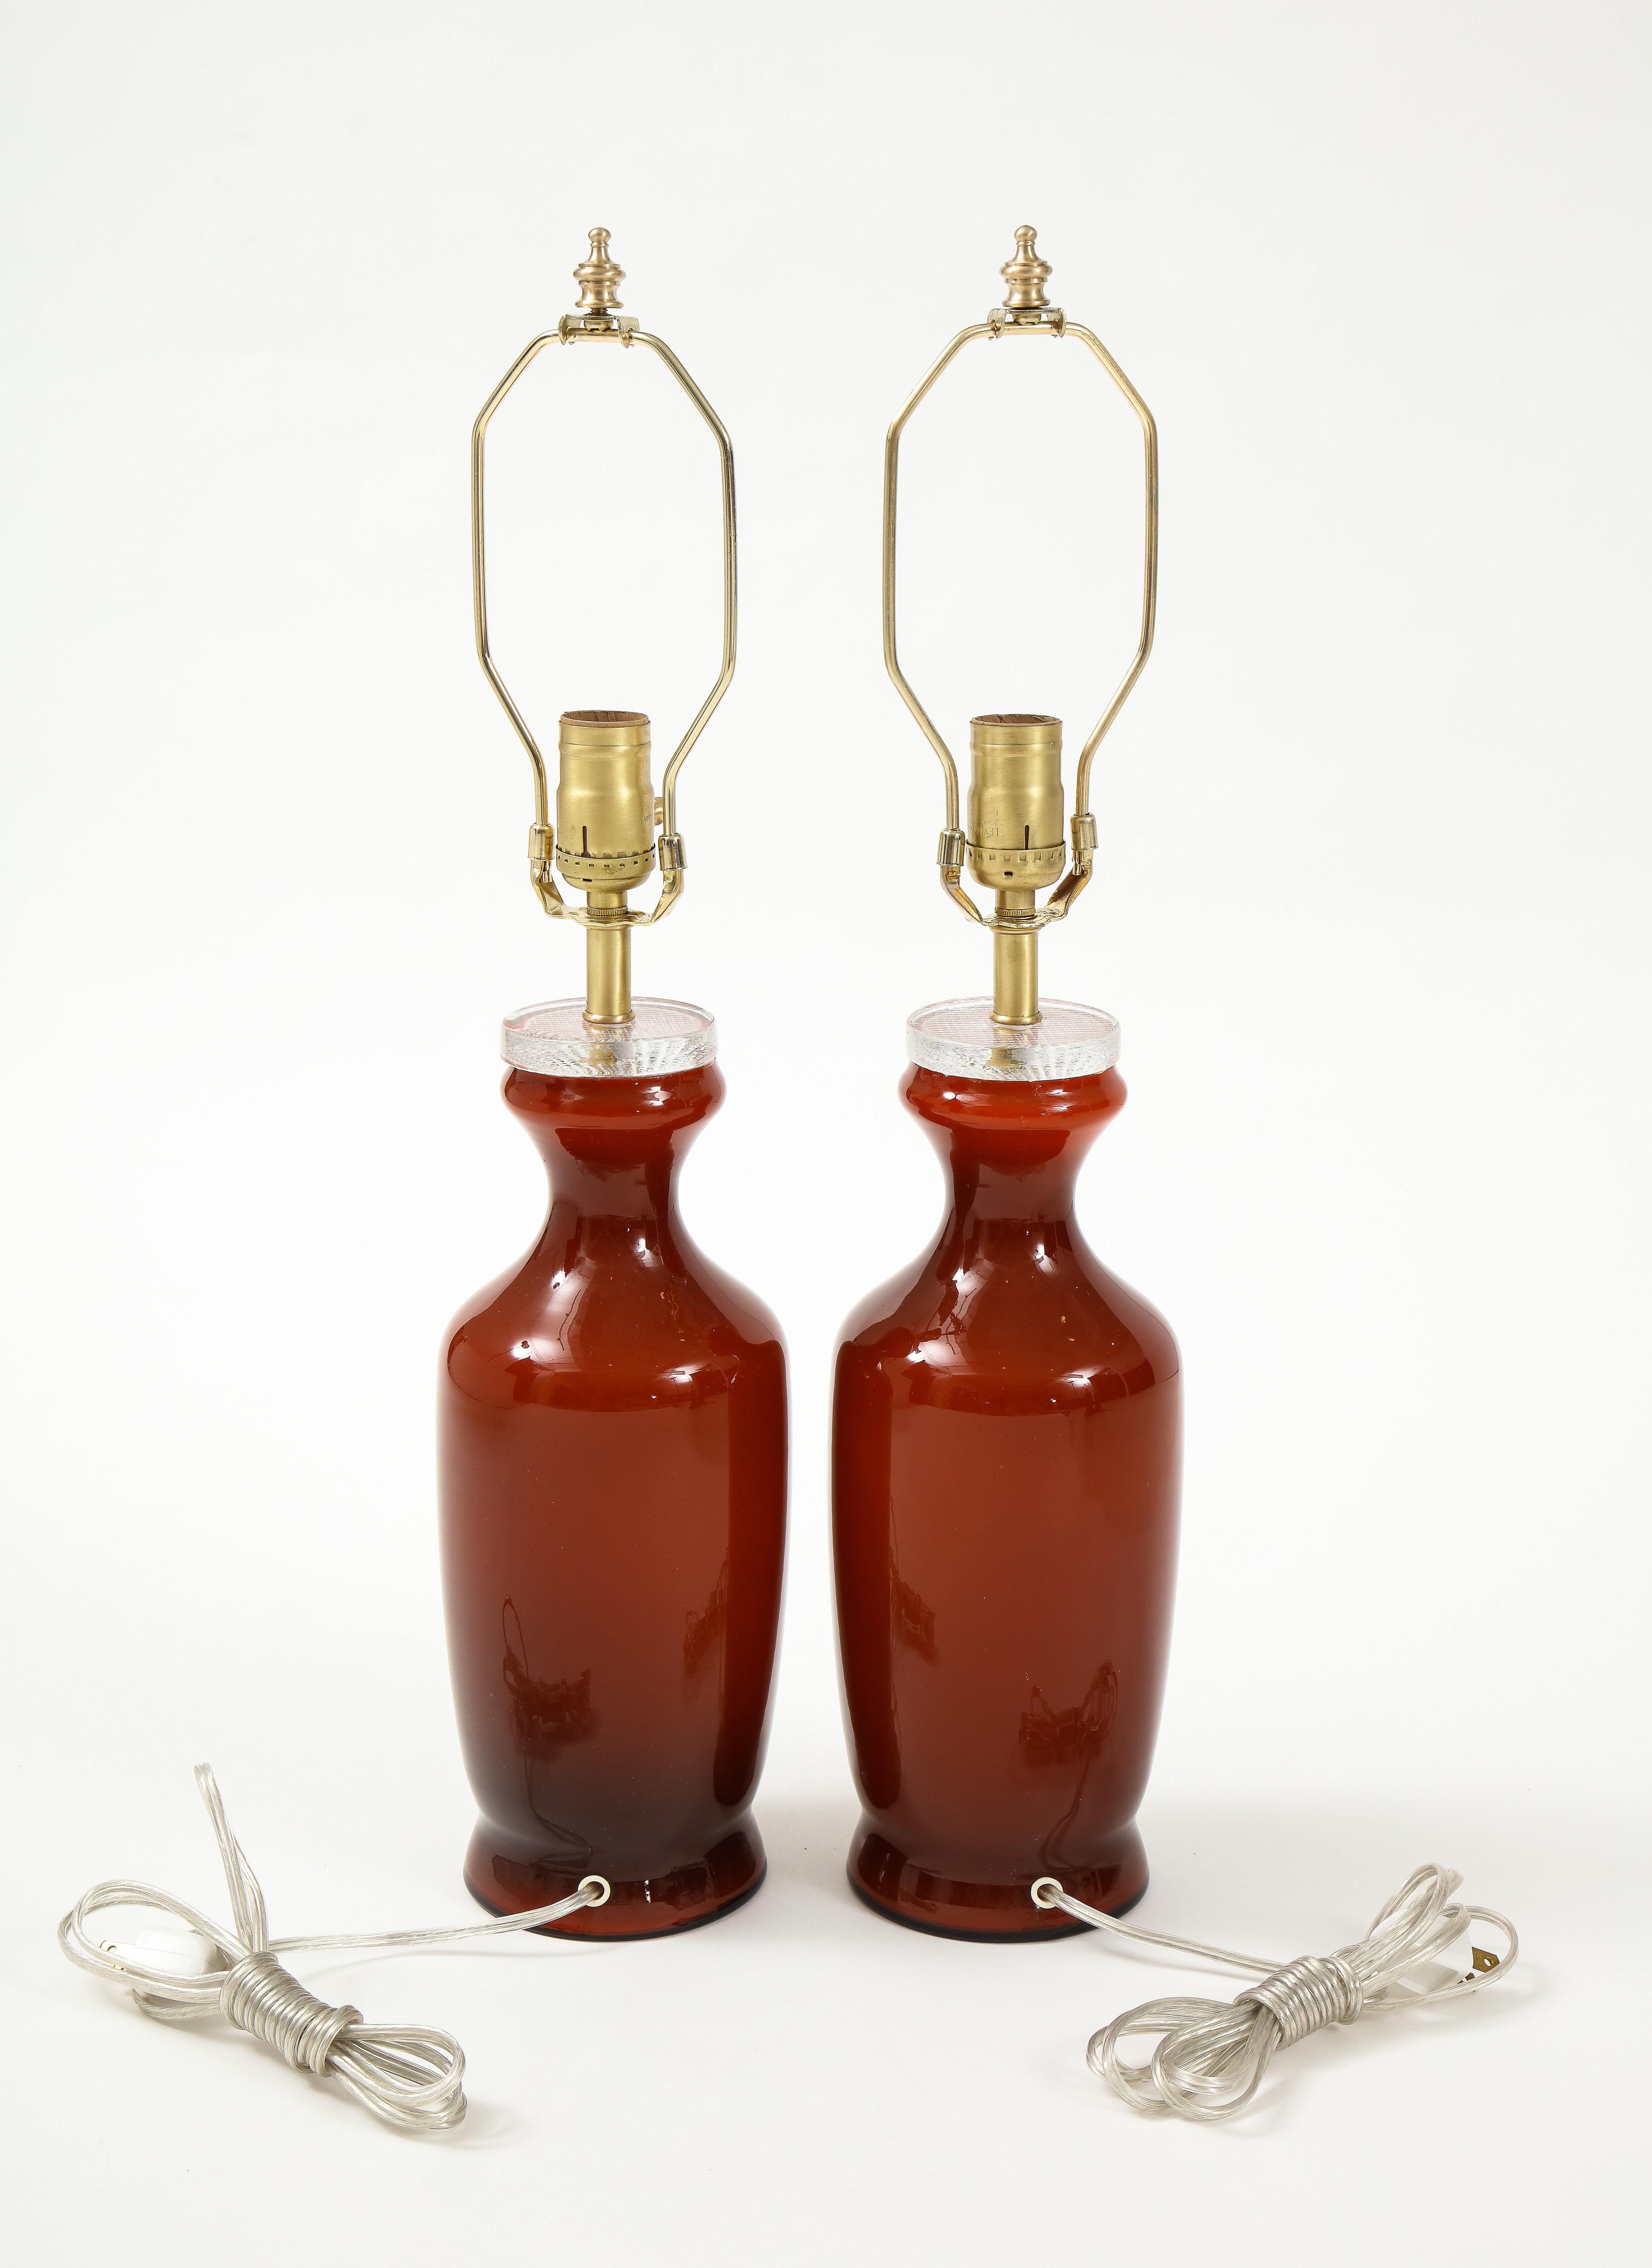 Pair of Scandinavian Modern glass lamps in a wonderful burnt orange/red color with brass fittings. 100W max bulbs. Rewired for use in USA.